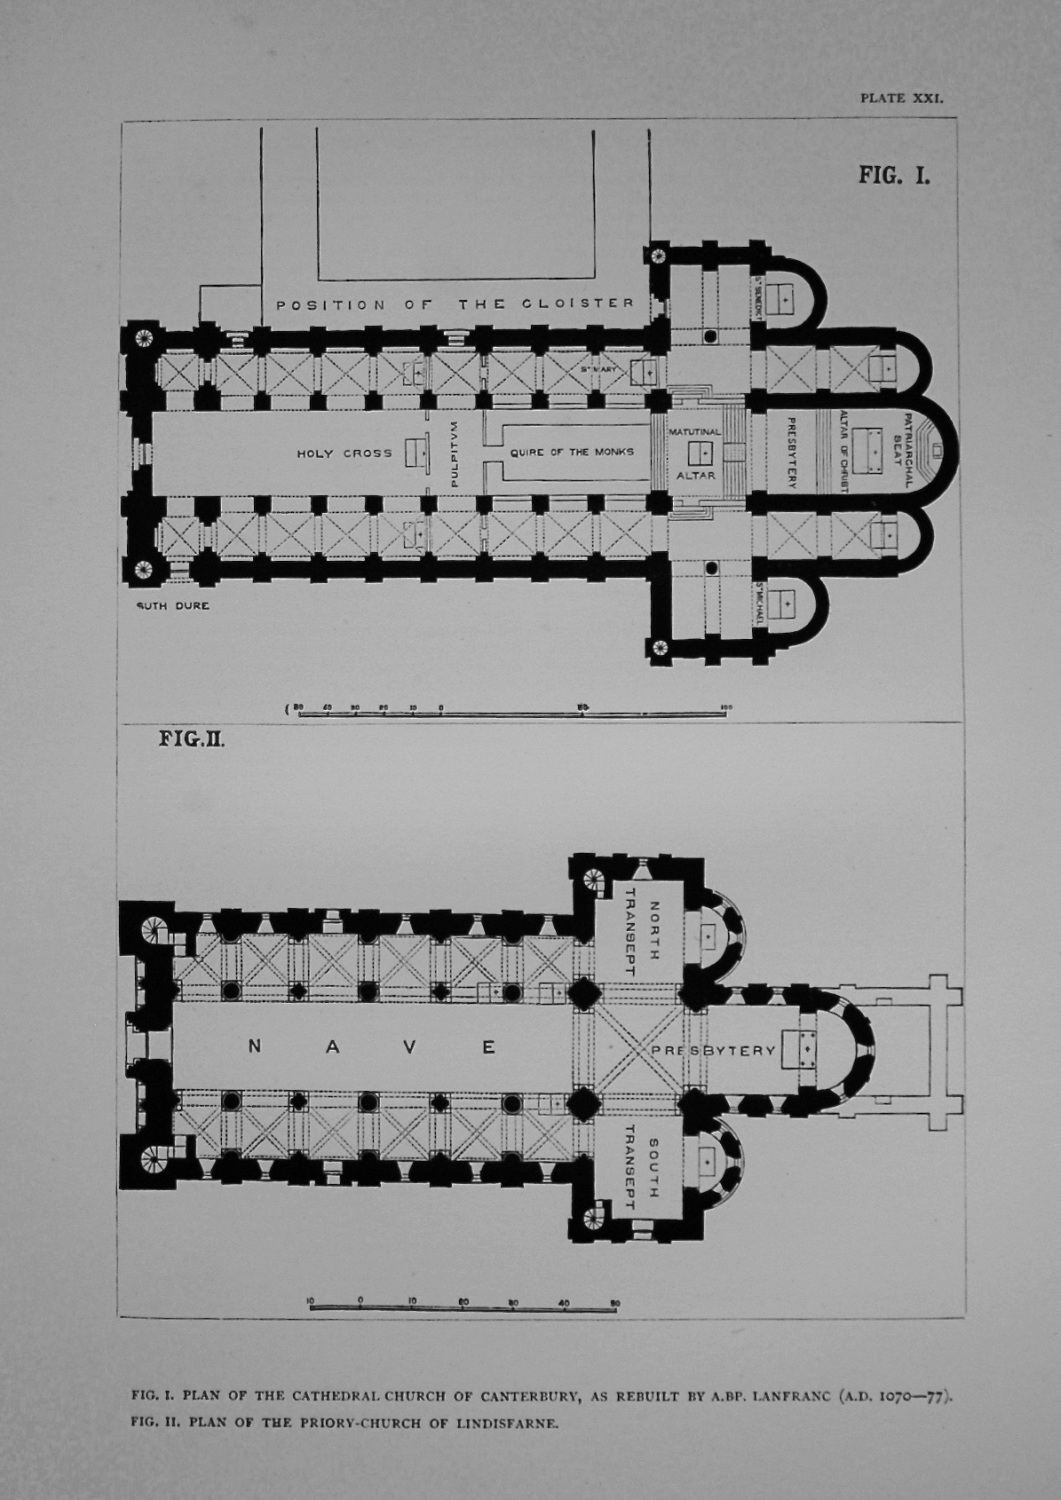 Plan of the Cathedral Church of Canterbury, as Rebuilt by A.BP. Lanfranc (A